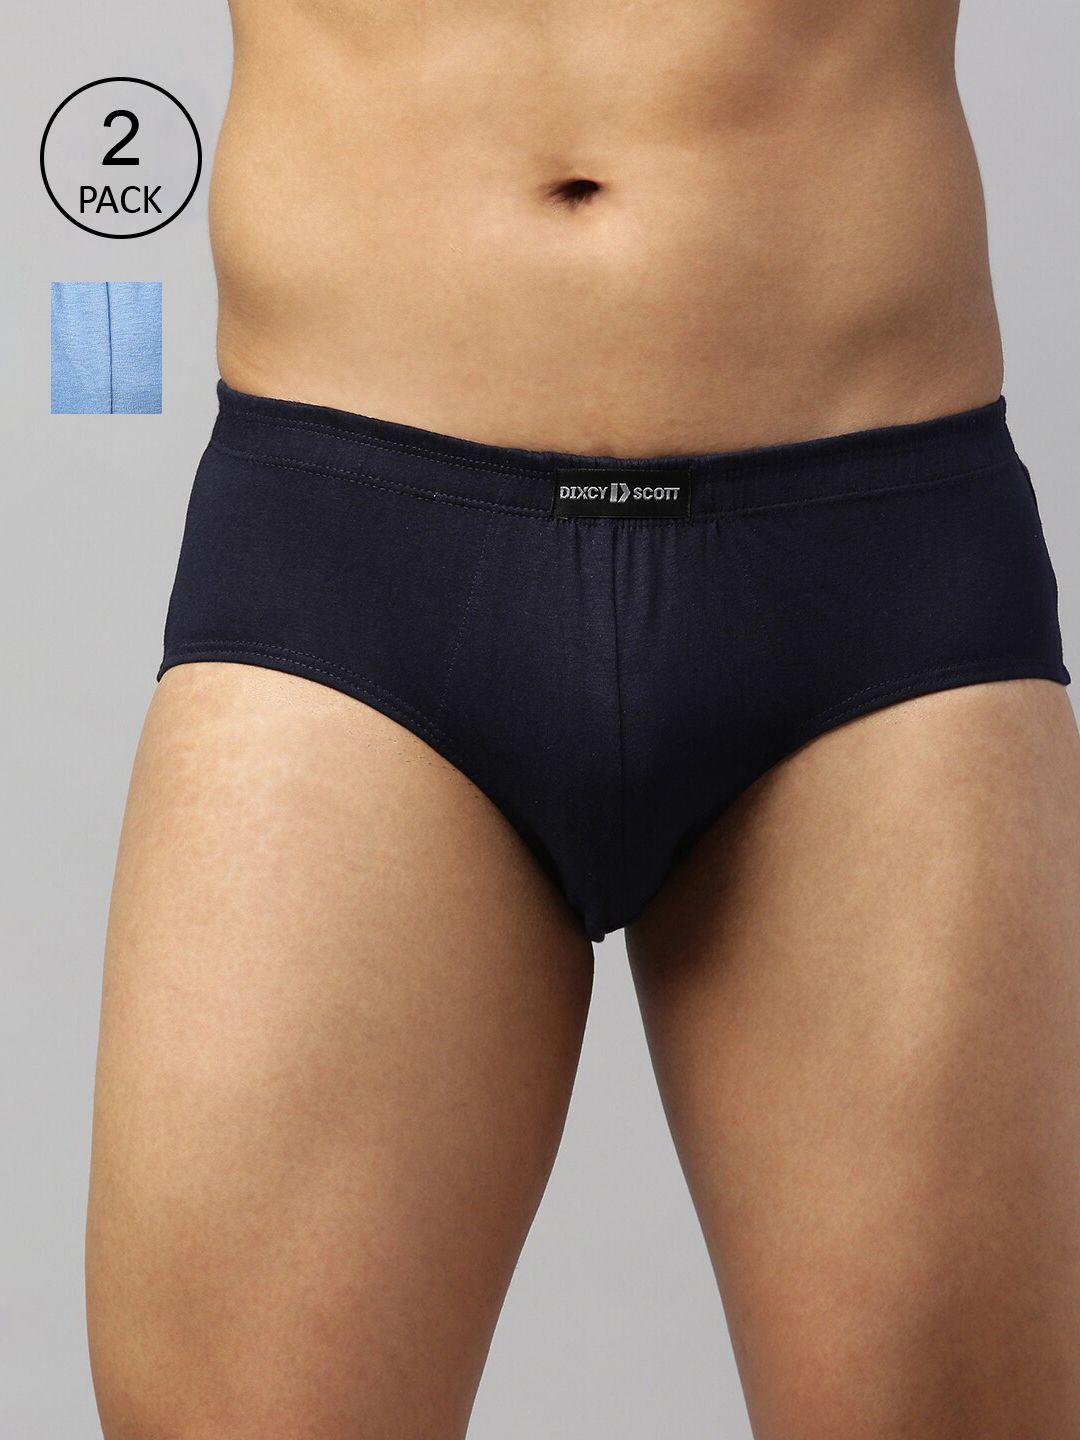 dixcy scott maximus men pack of 2 solid anti microbial pure cotton basic briefs